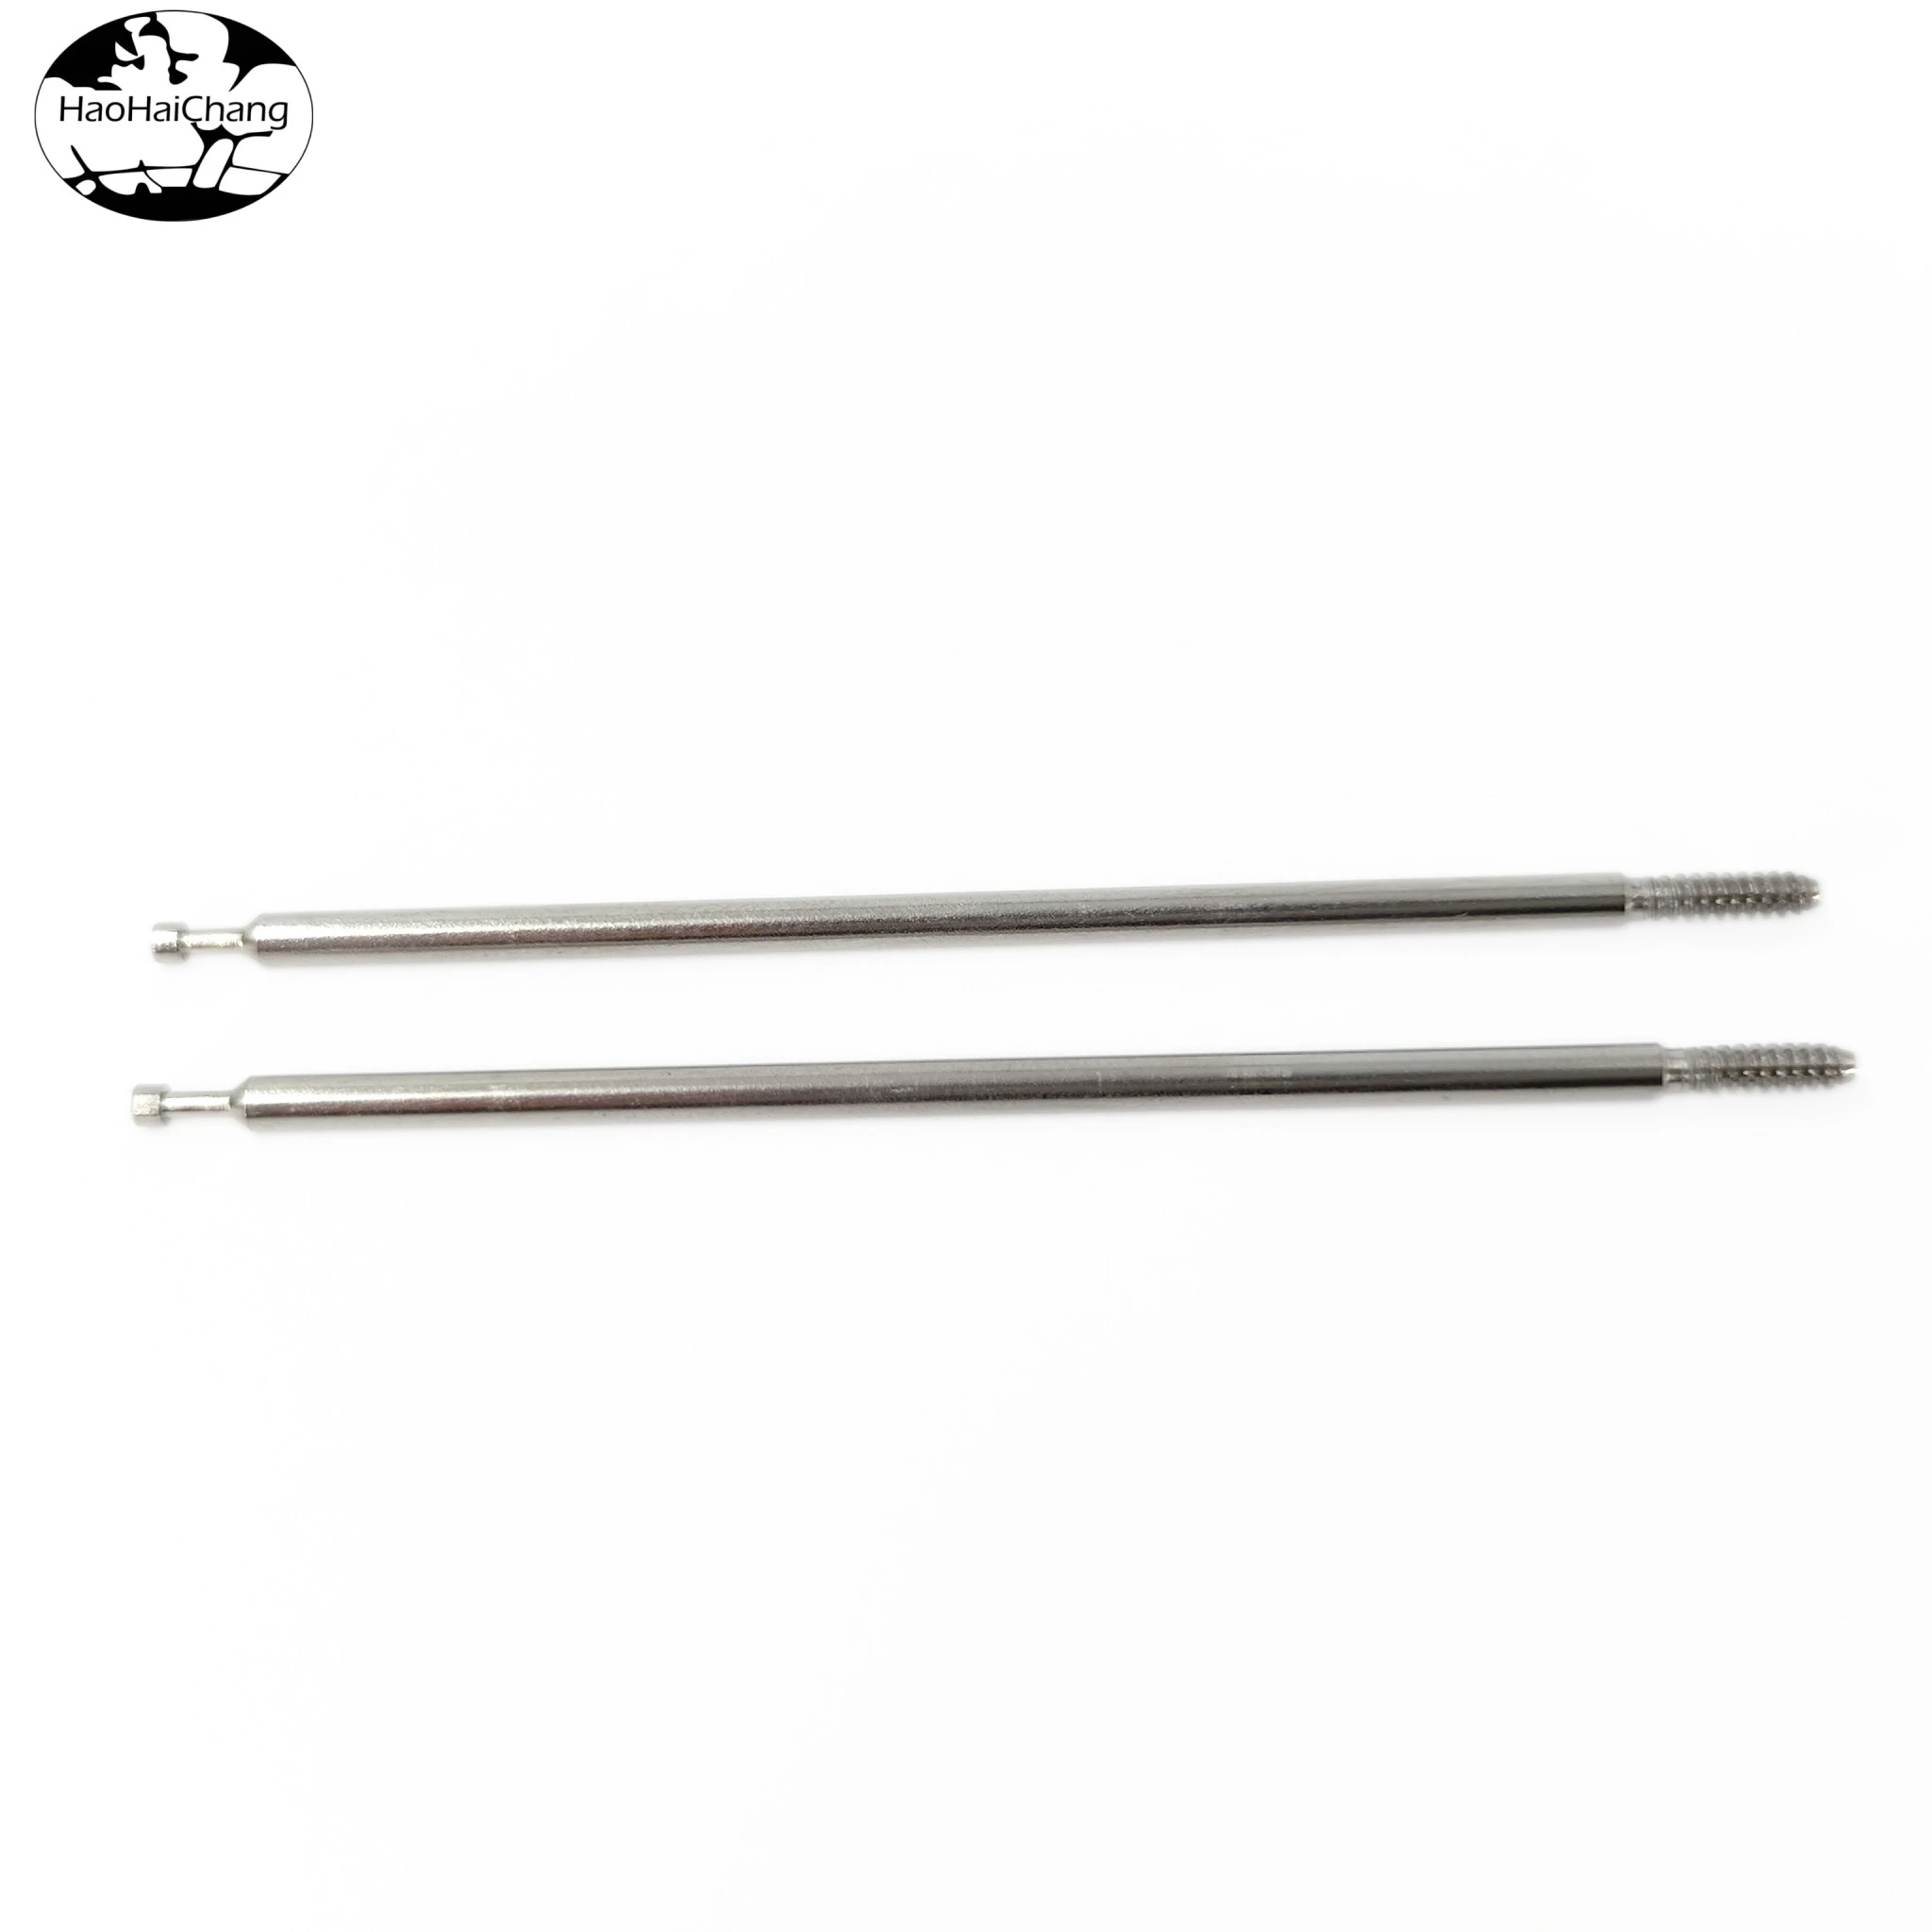 HHC-481 Electric Heating Appliance Accessories Heating Stainless Steel M2.3 Upper Lead Rod